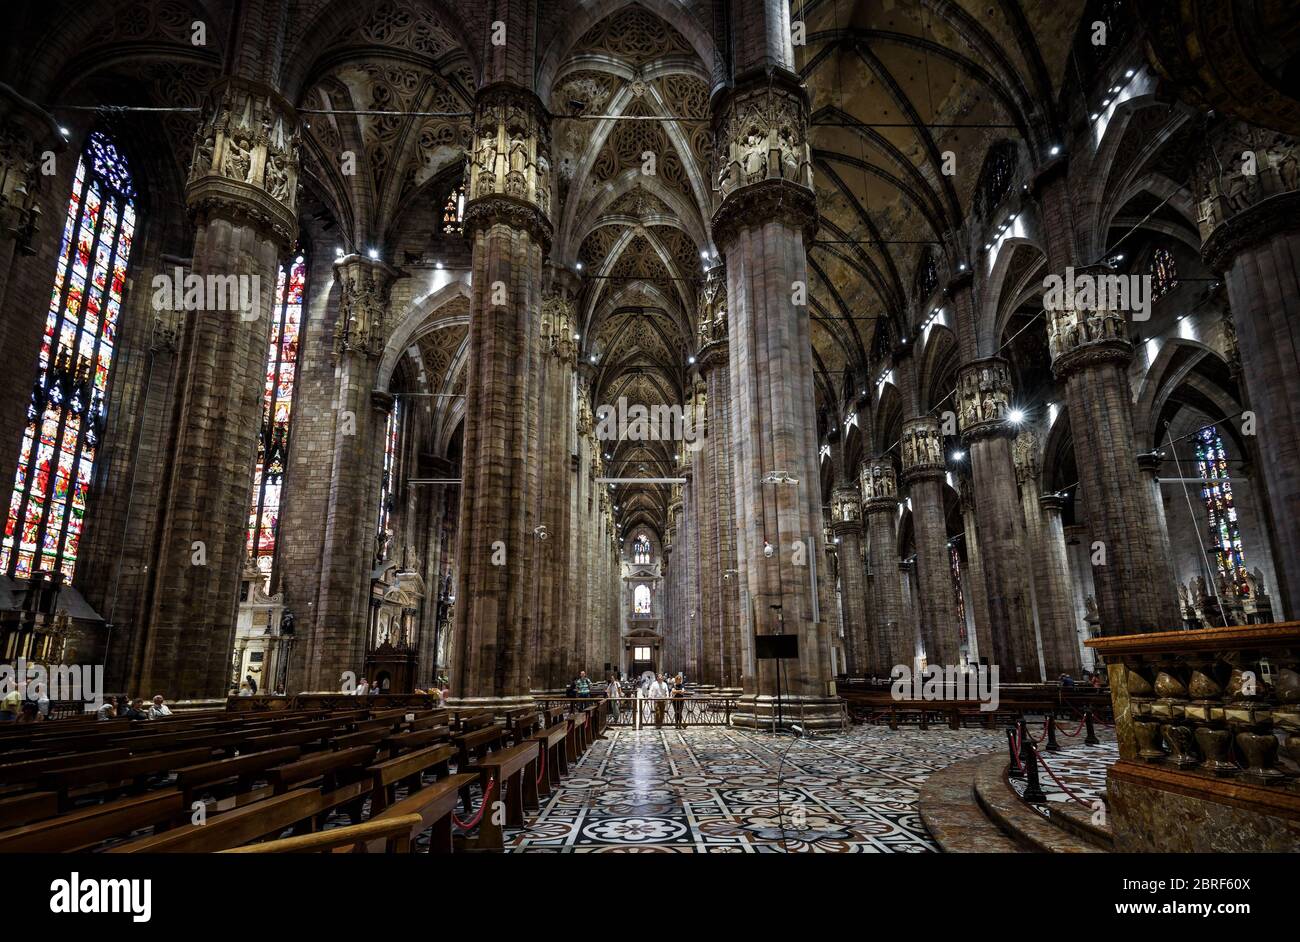 Milan, Italy - May 16, 2017: Interior of the Milan Cathedral (Duomo di Milano). Milan Duomo is the largest church in Italy and the fifth largest in th Stock Photo